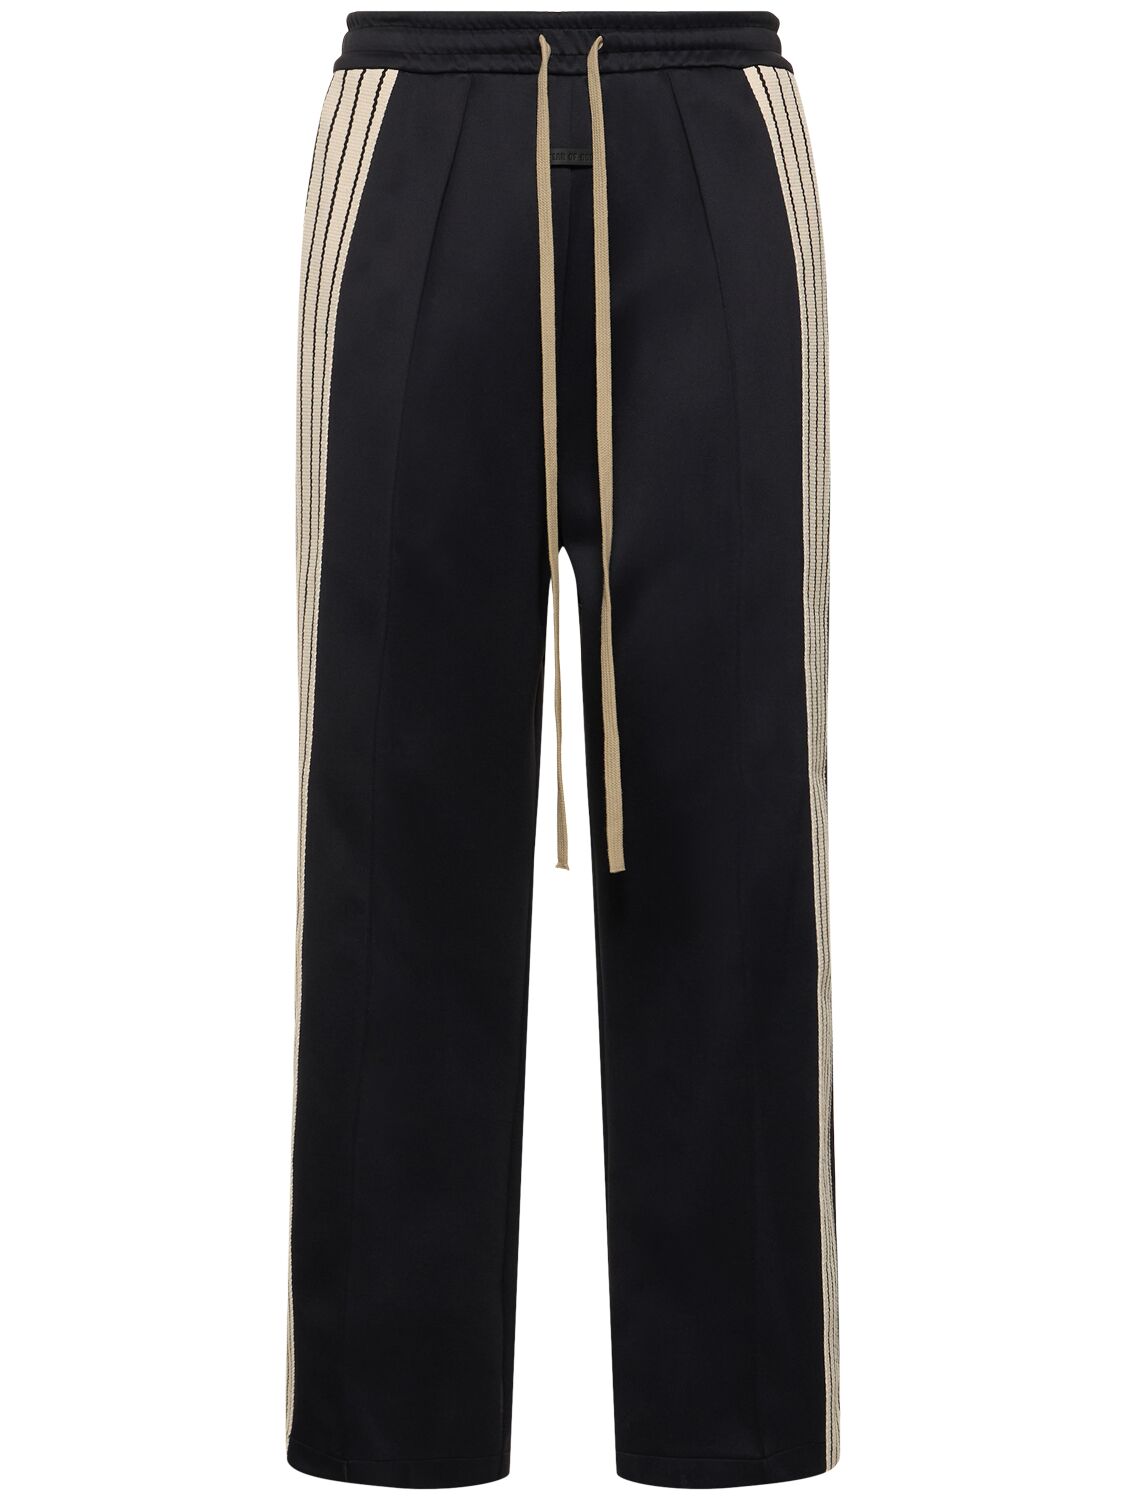 Image of Relaxed Pintuck Sweatpants W/ Side Bands